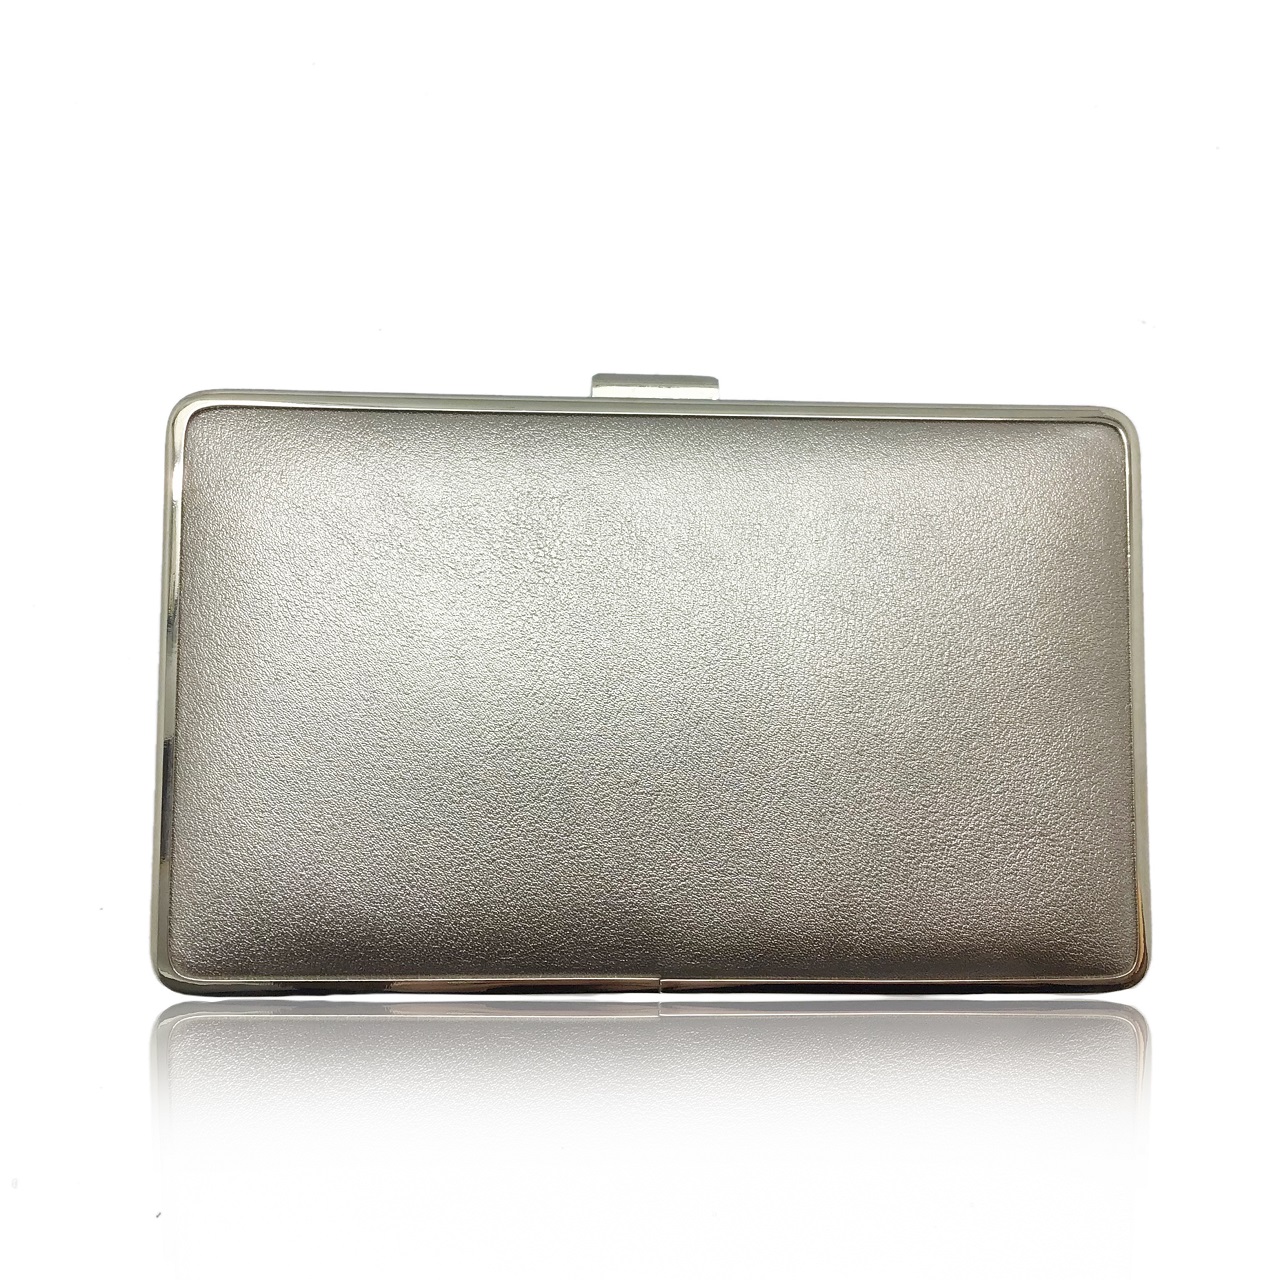 Silver Purse and Clutch - Stylish and Versatile Accessories for Any Outfit